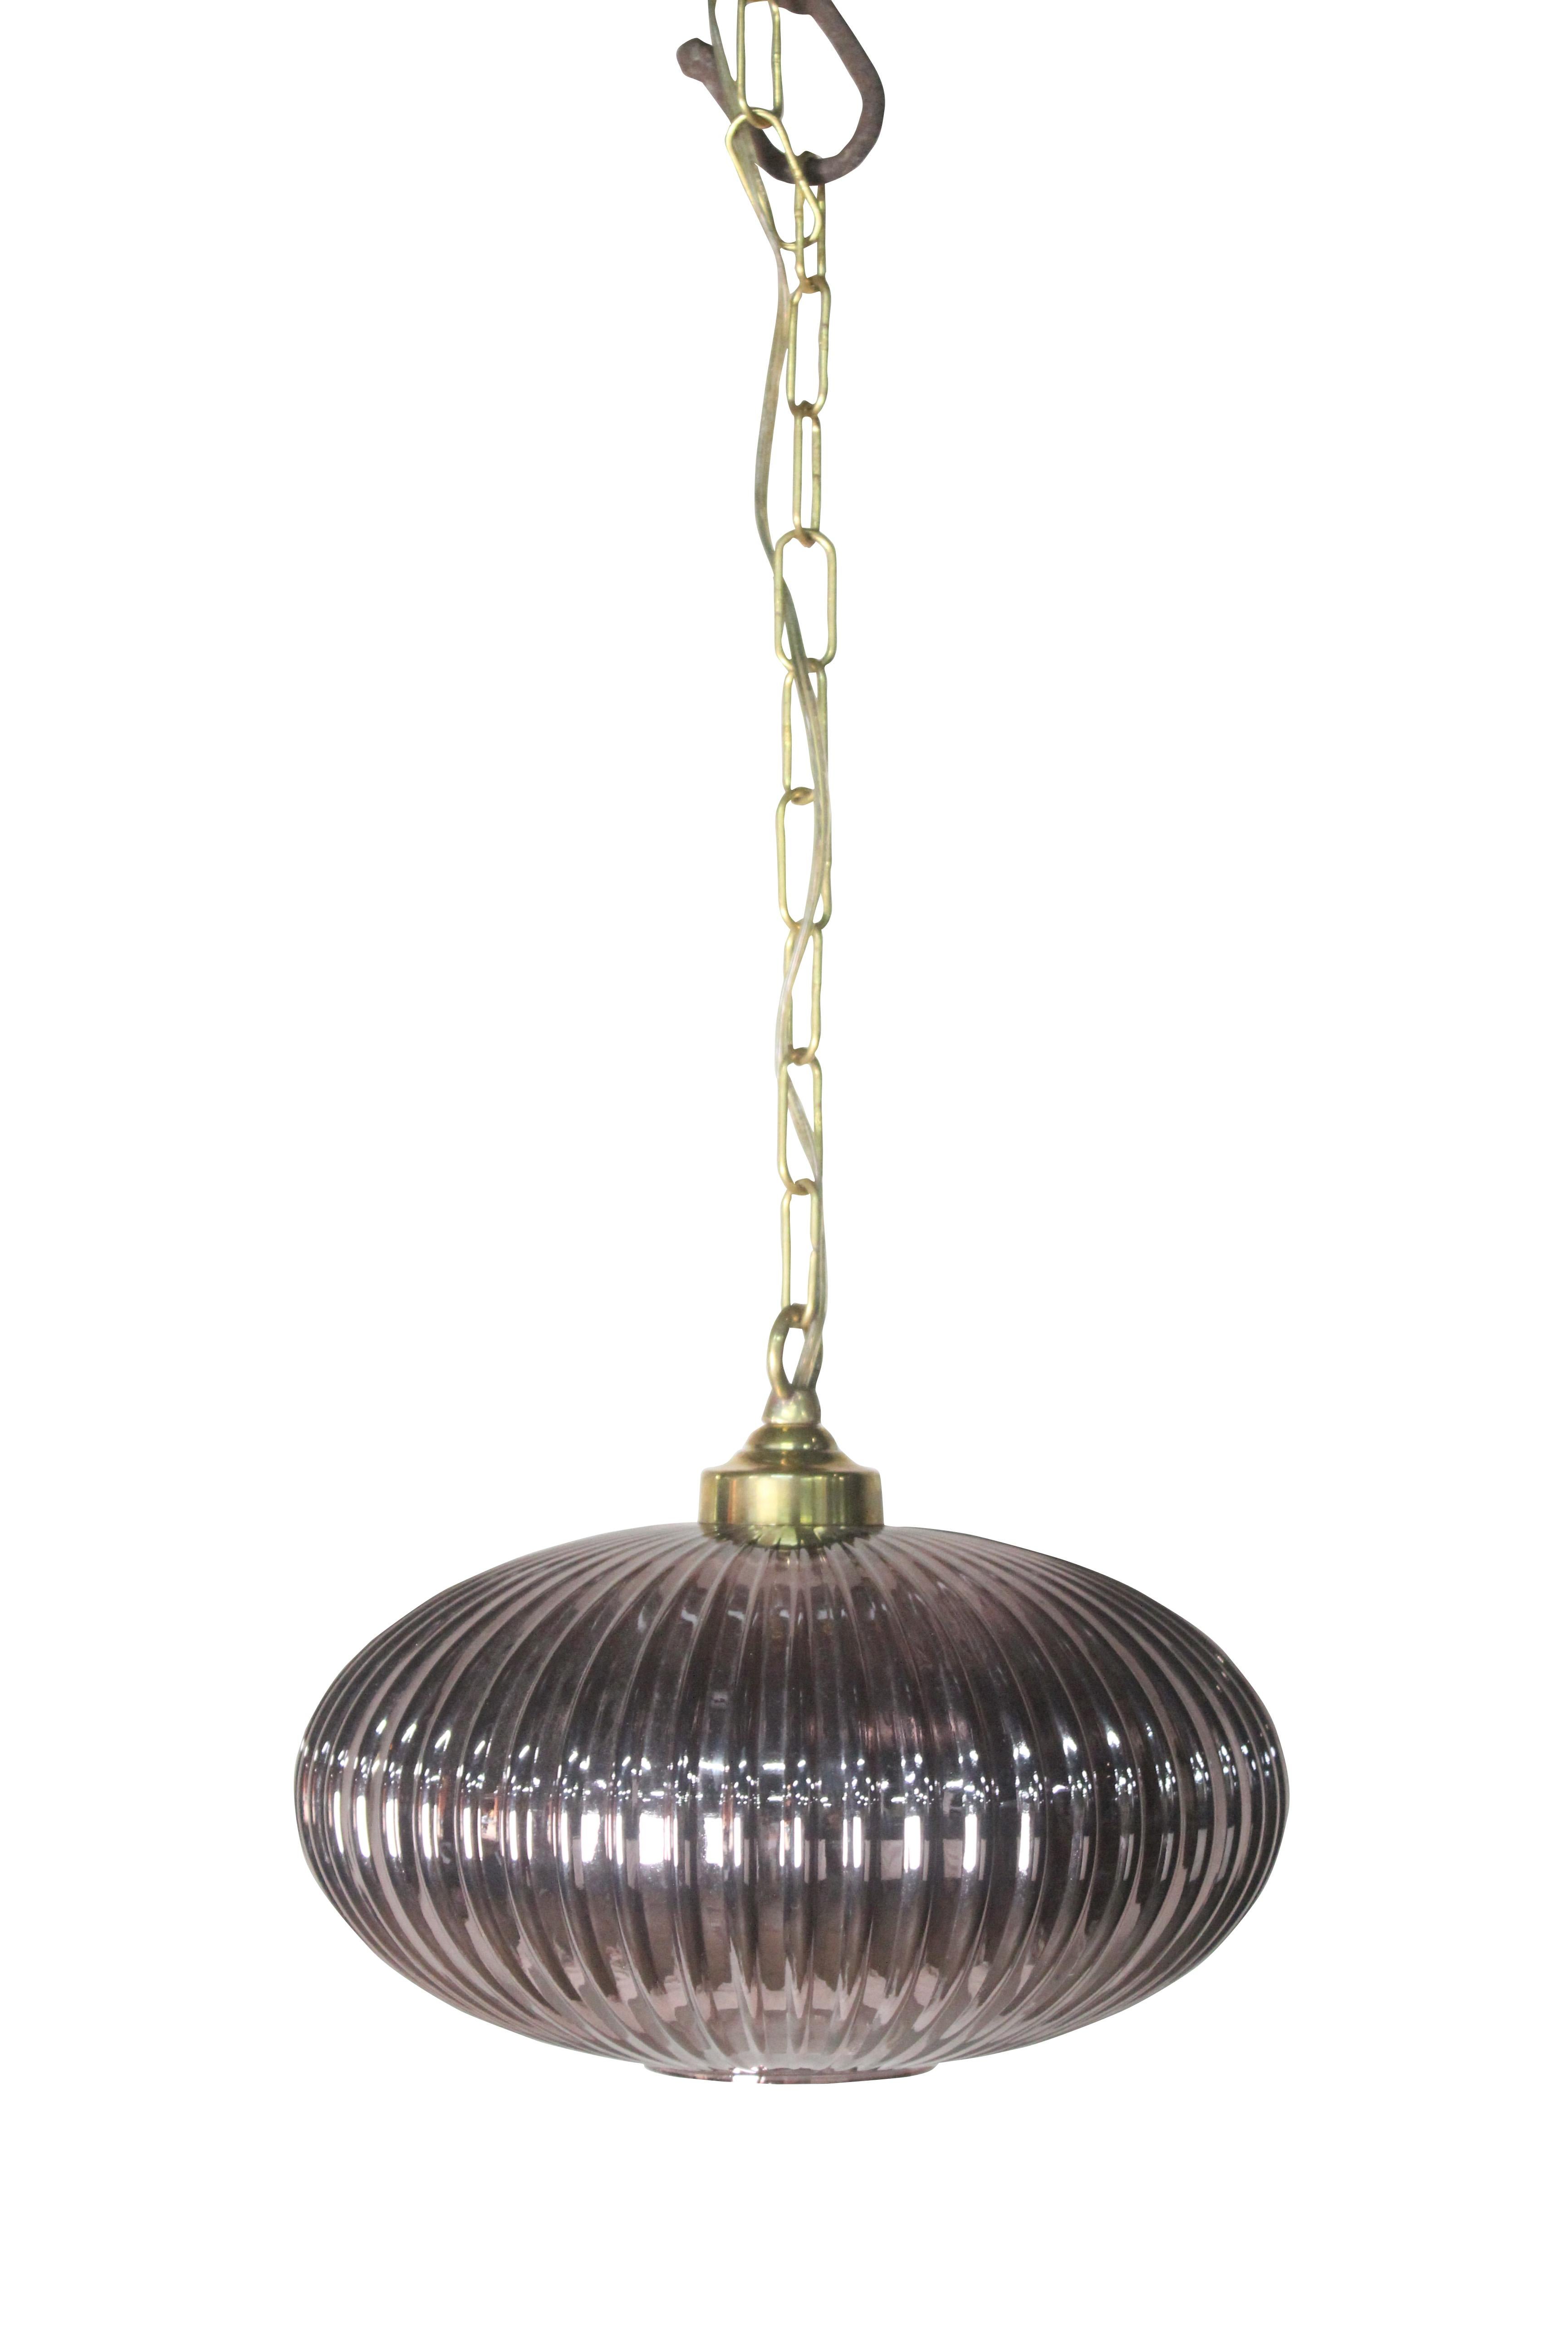 A beautiful pair of pale amethyst, ribbed glass pendant lights. Brass light fixture, rewired for American use. 4' of brass chain and ceiling canopy included. Mid-Century Modern, European. This pale amethyst color is very flattering when lit and the